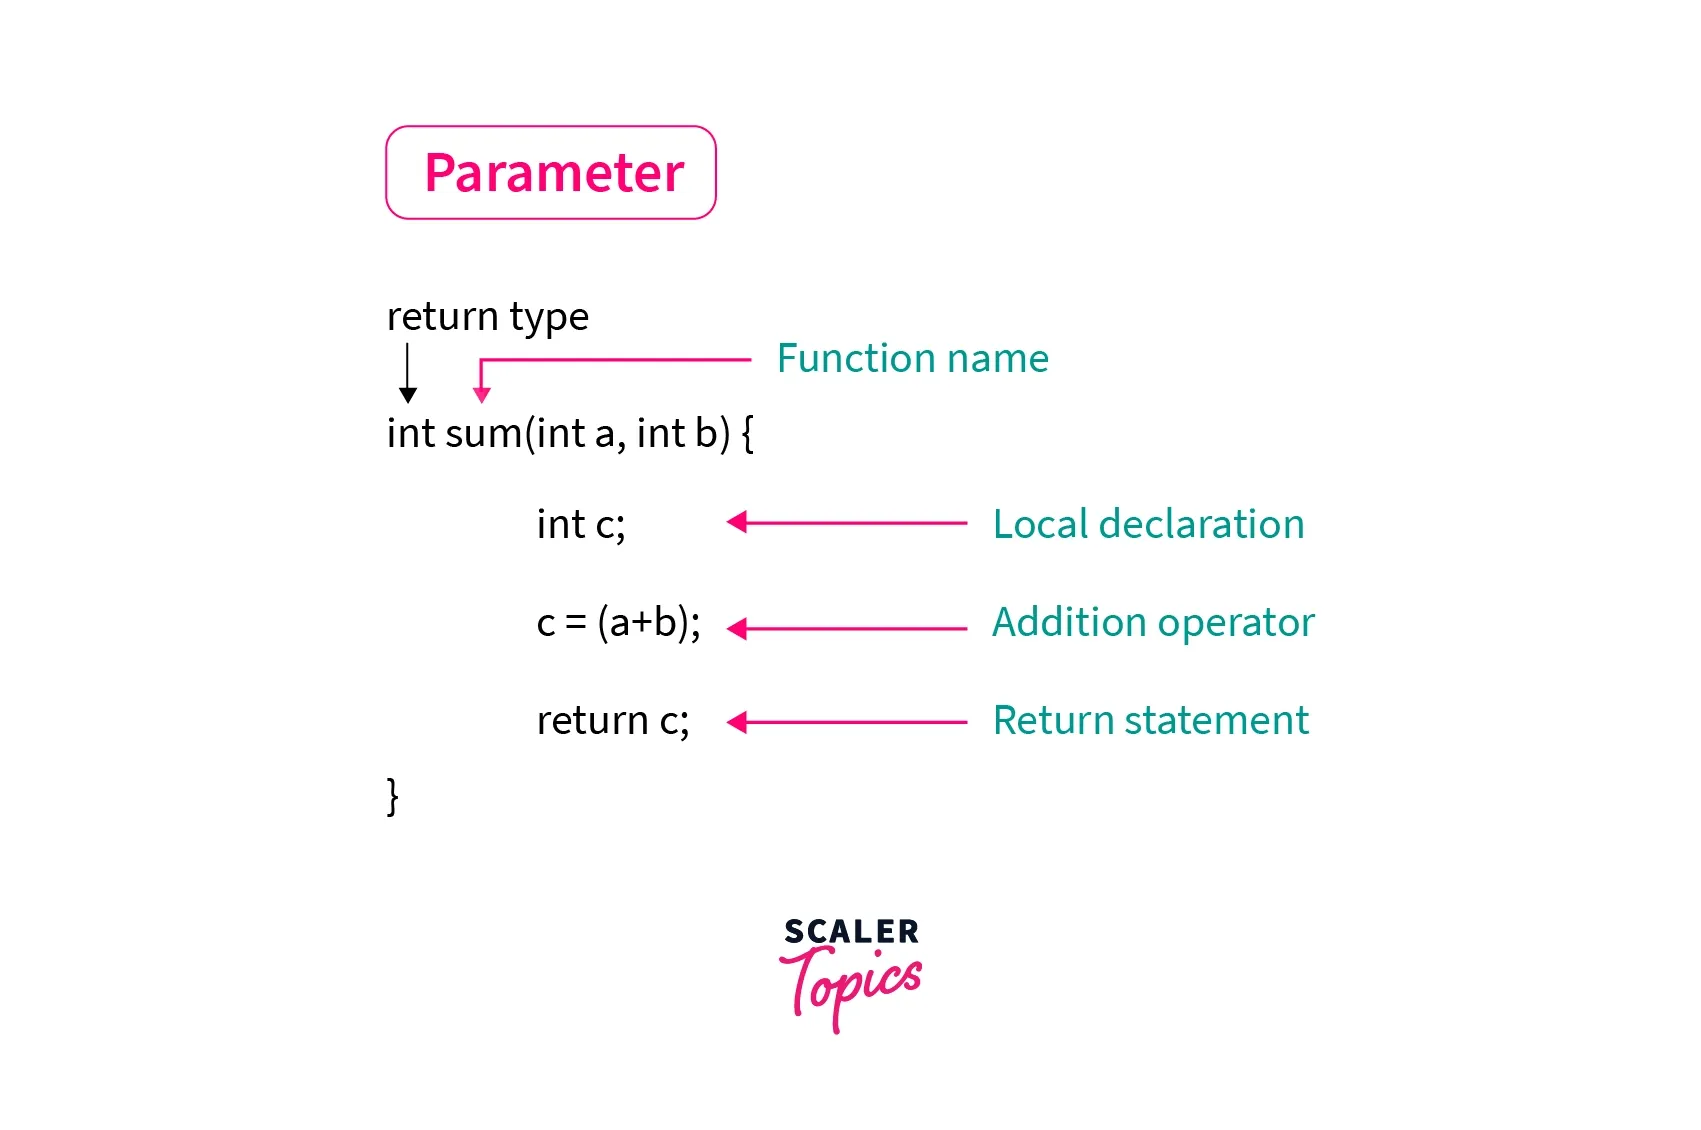 What are Parameters?